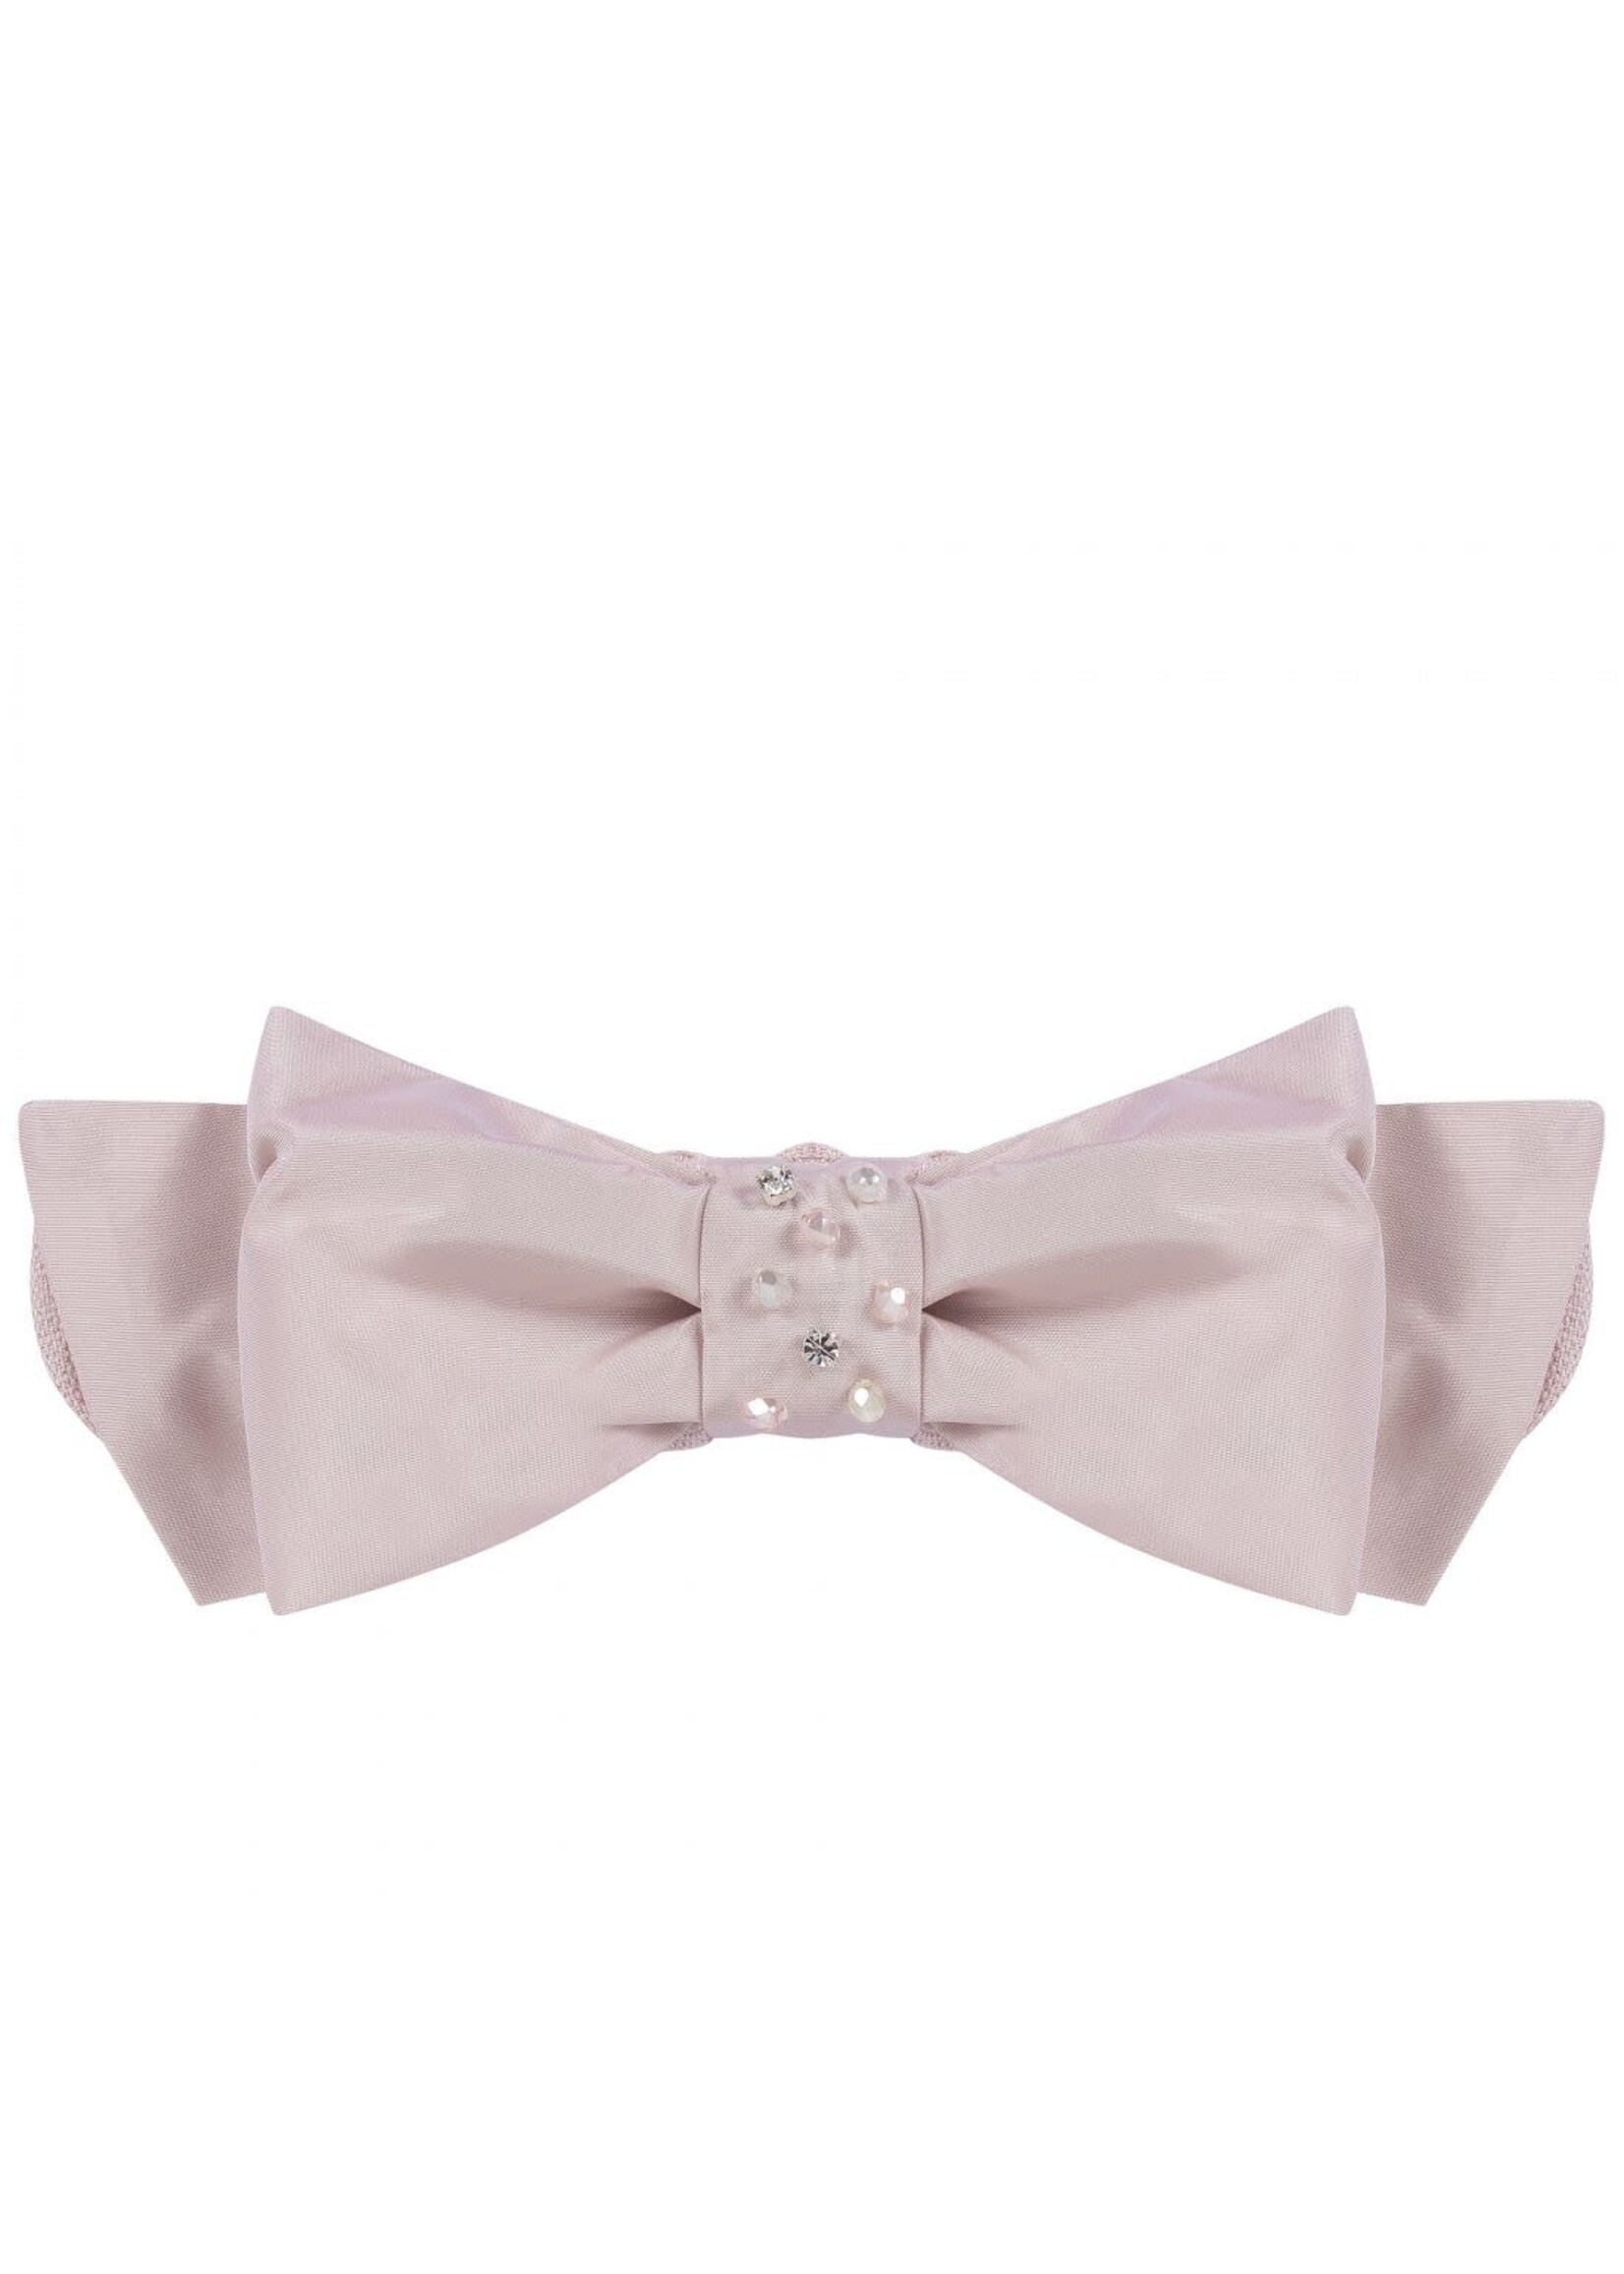 Lapin House Lapin House Hairband PINK-232E0028